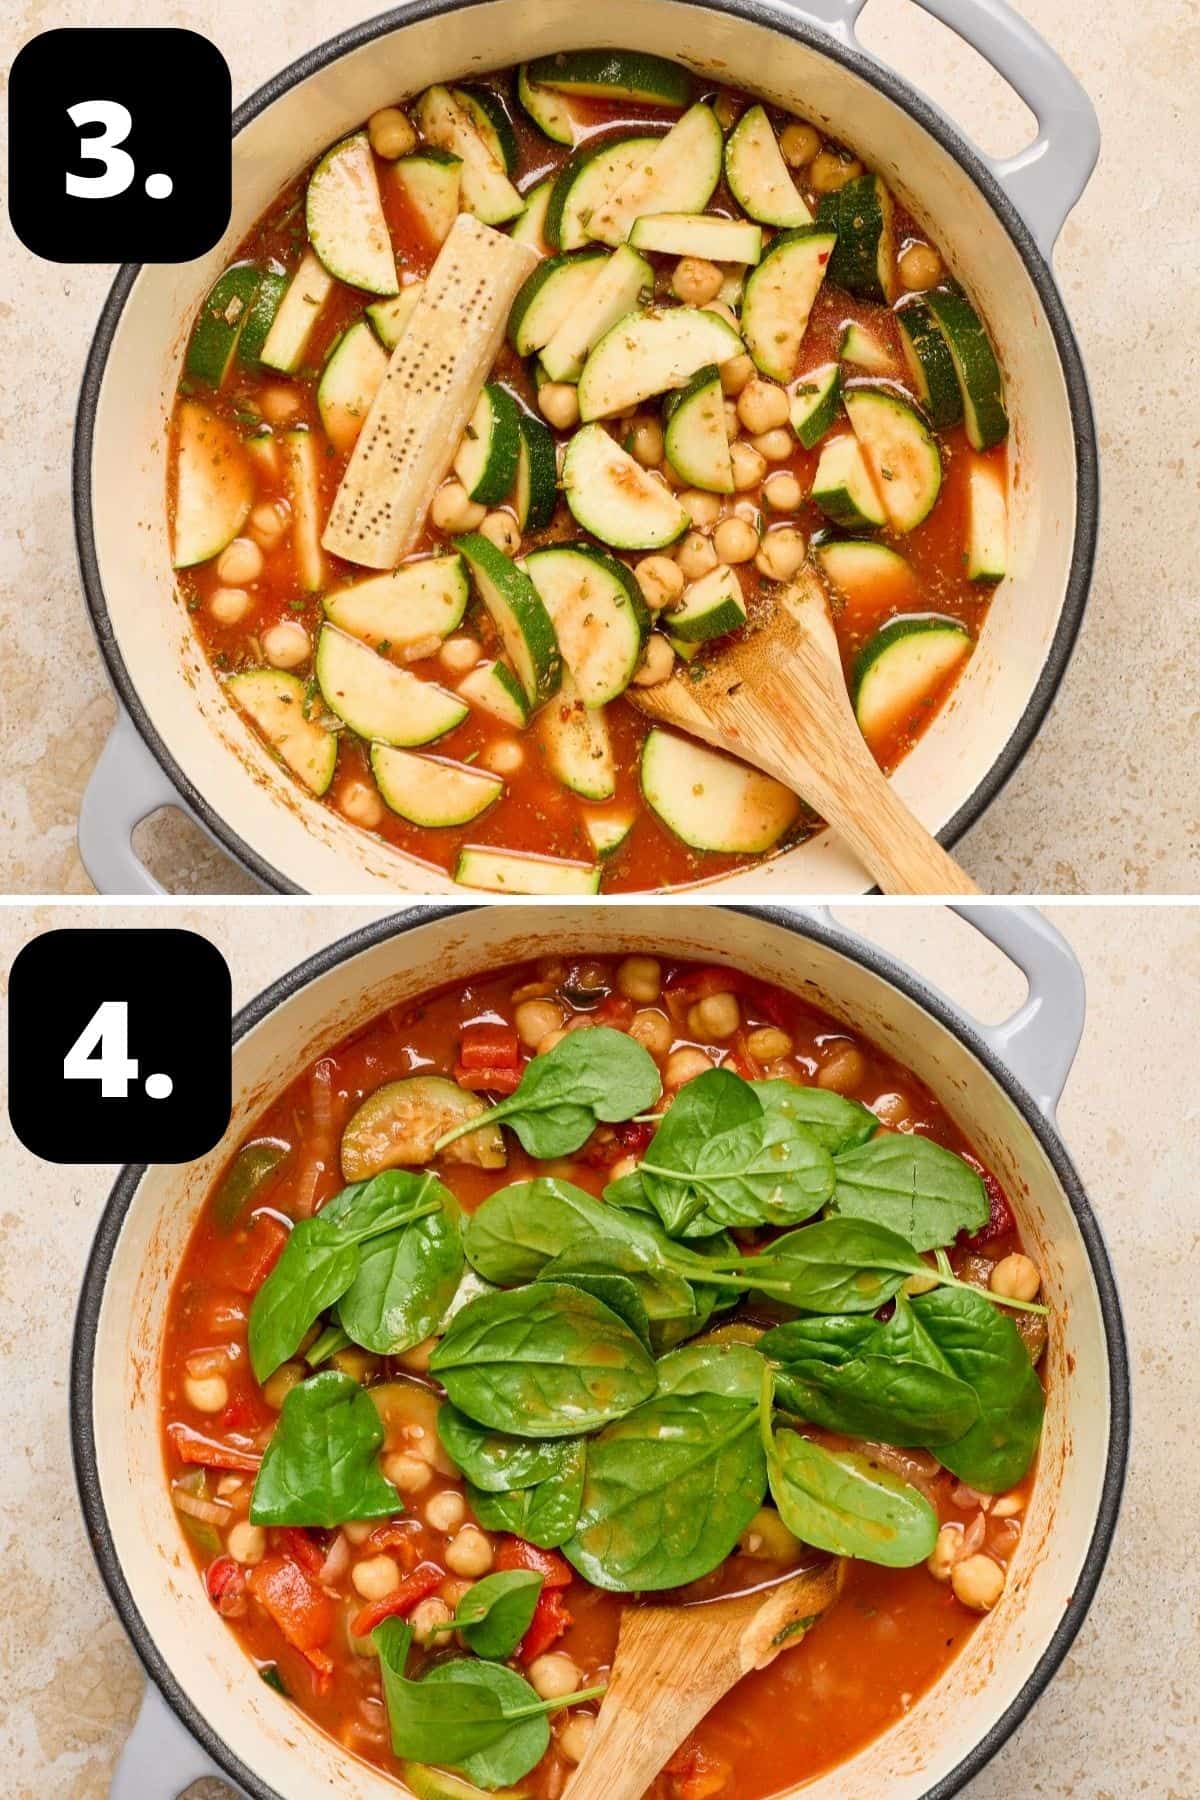 Steps 3-4 of preparing this recipe: the chickpeas and zucchini added to the pot and adding the baby spinach before serving.